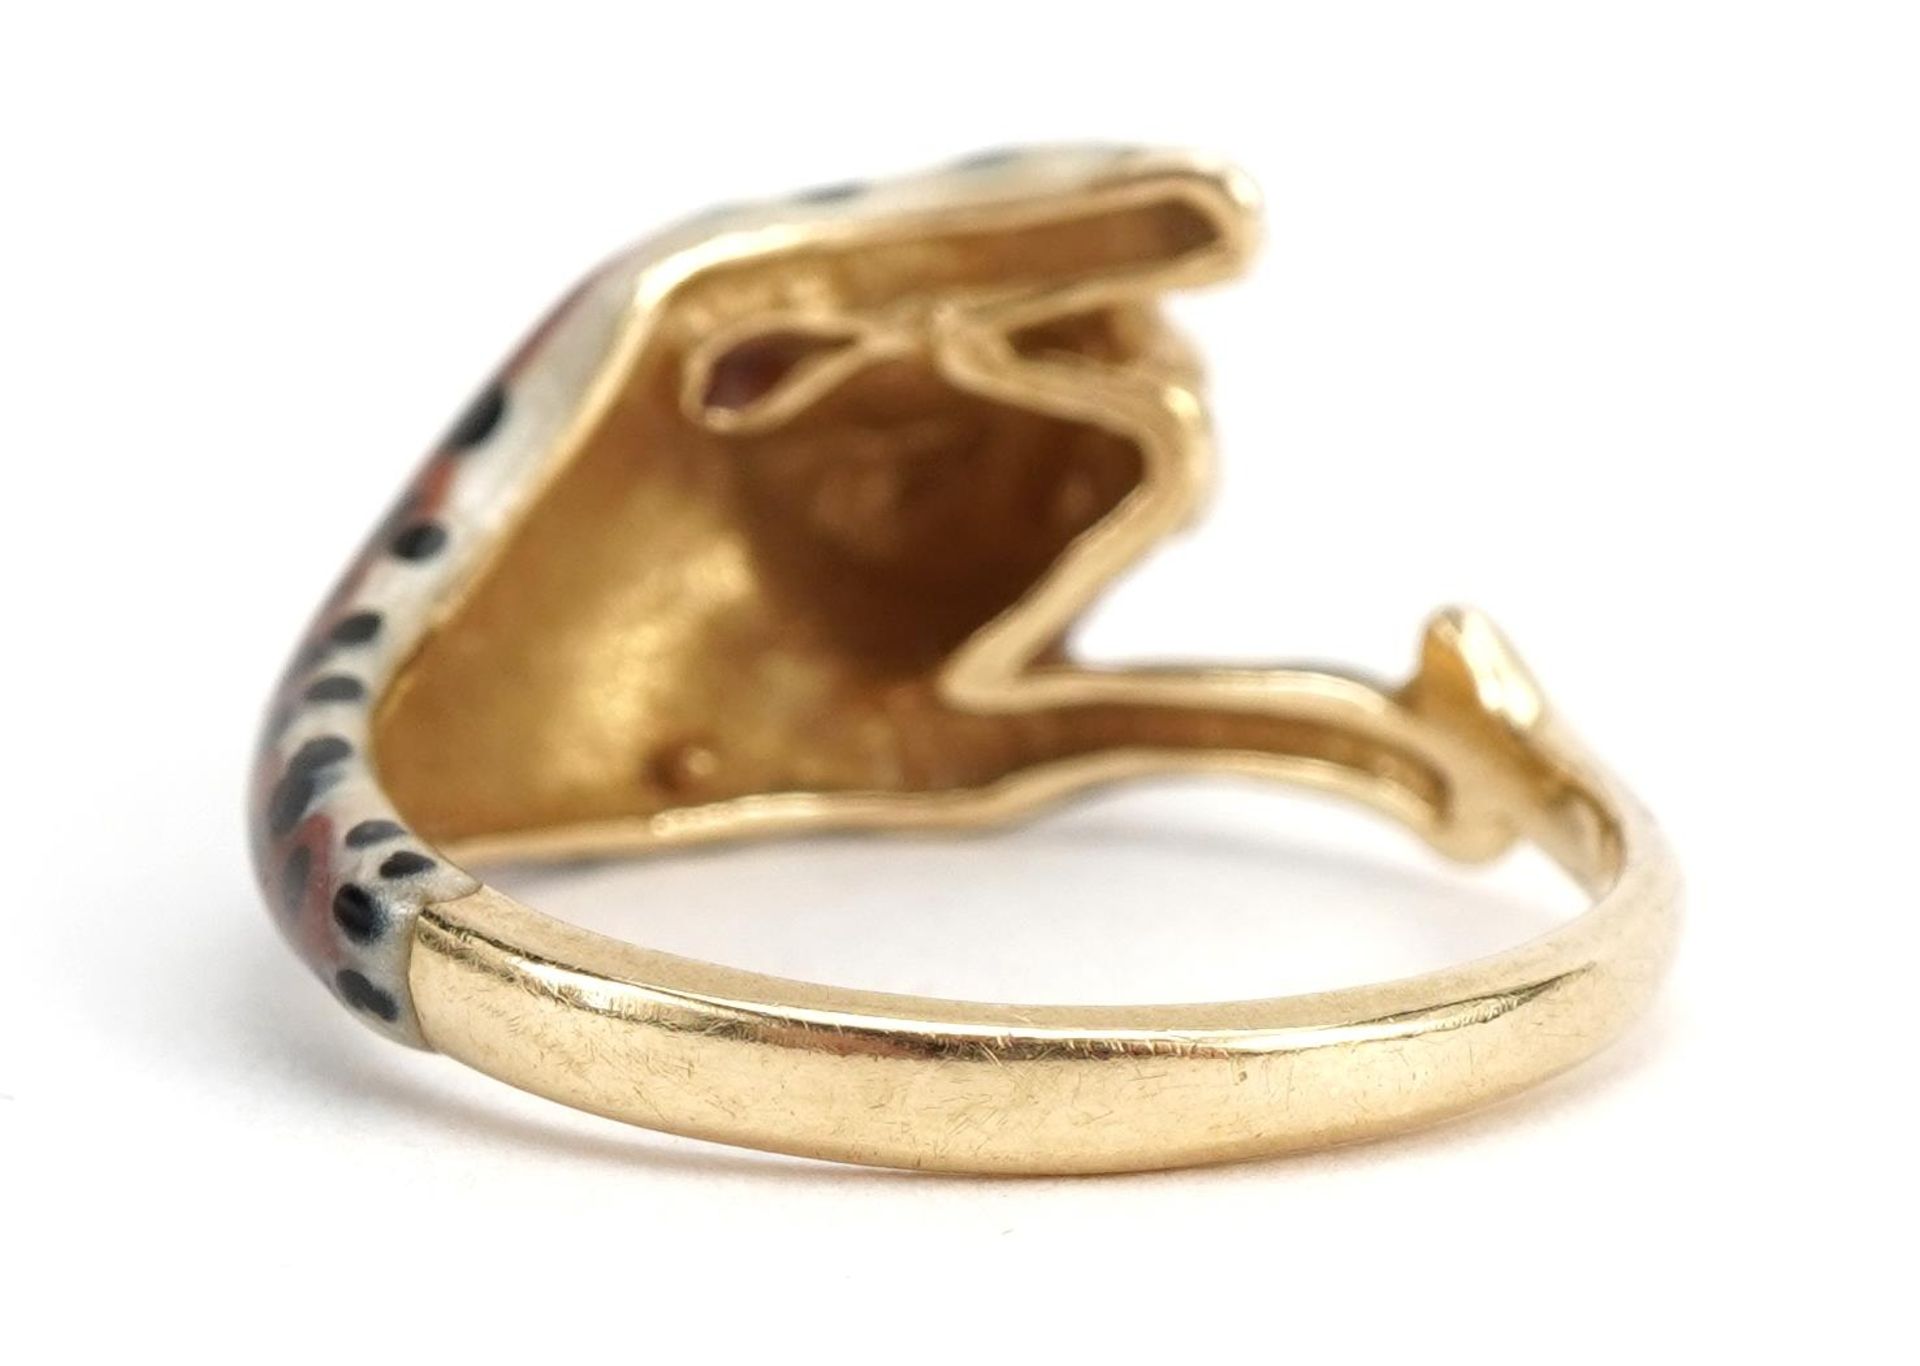 14k gold and enamel leopard ring, size M/N, 3.4g - Image 3 of 6